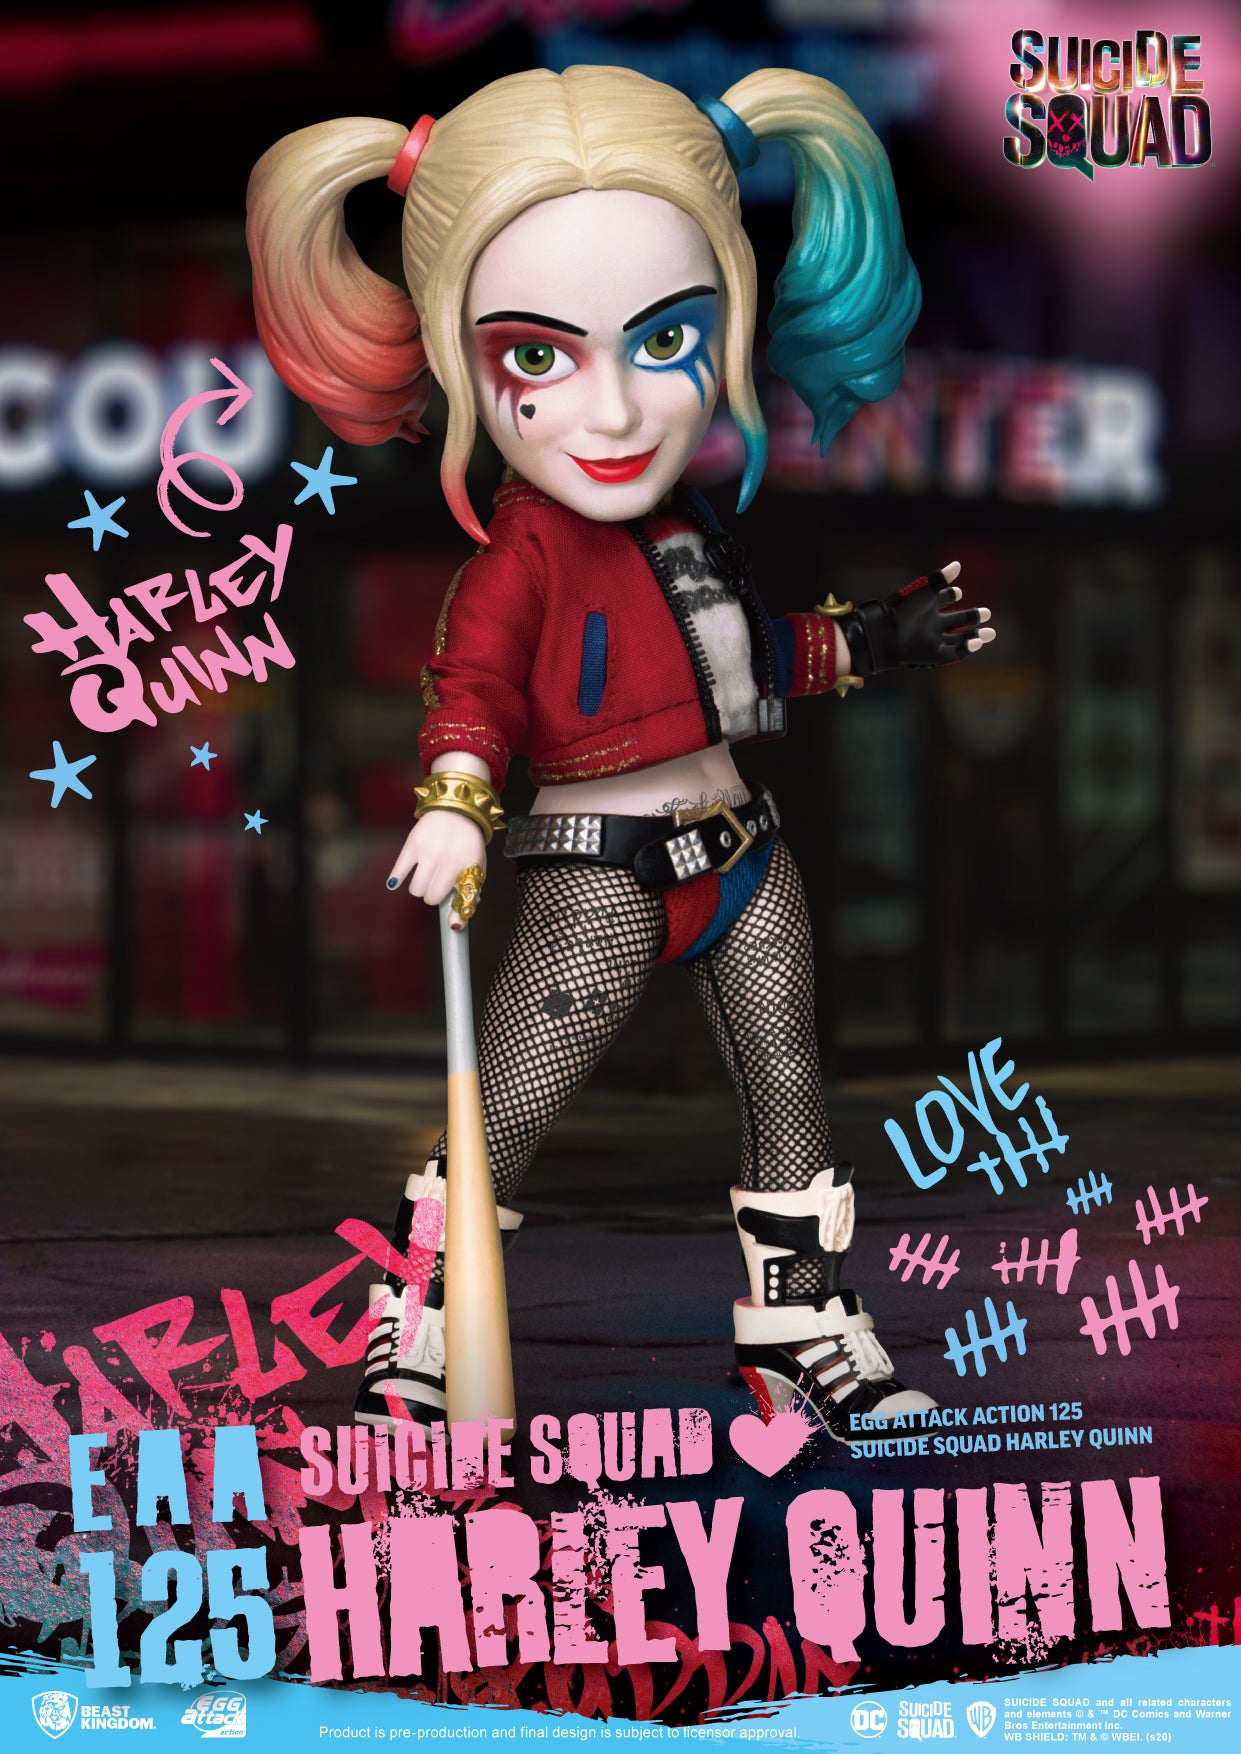 Suicide Squad Harley Quinn (Egg Attack Action)